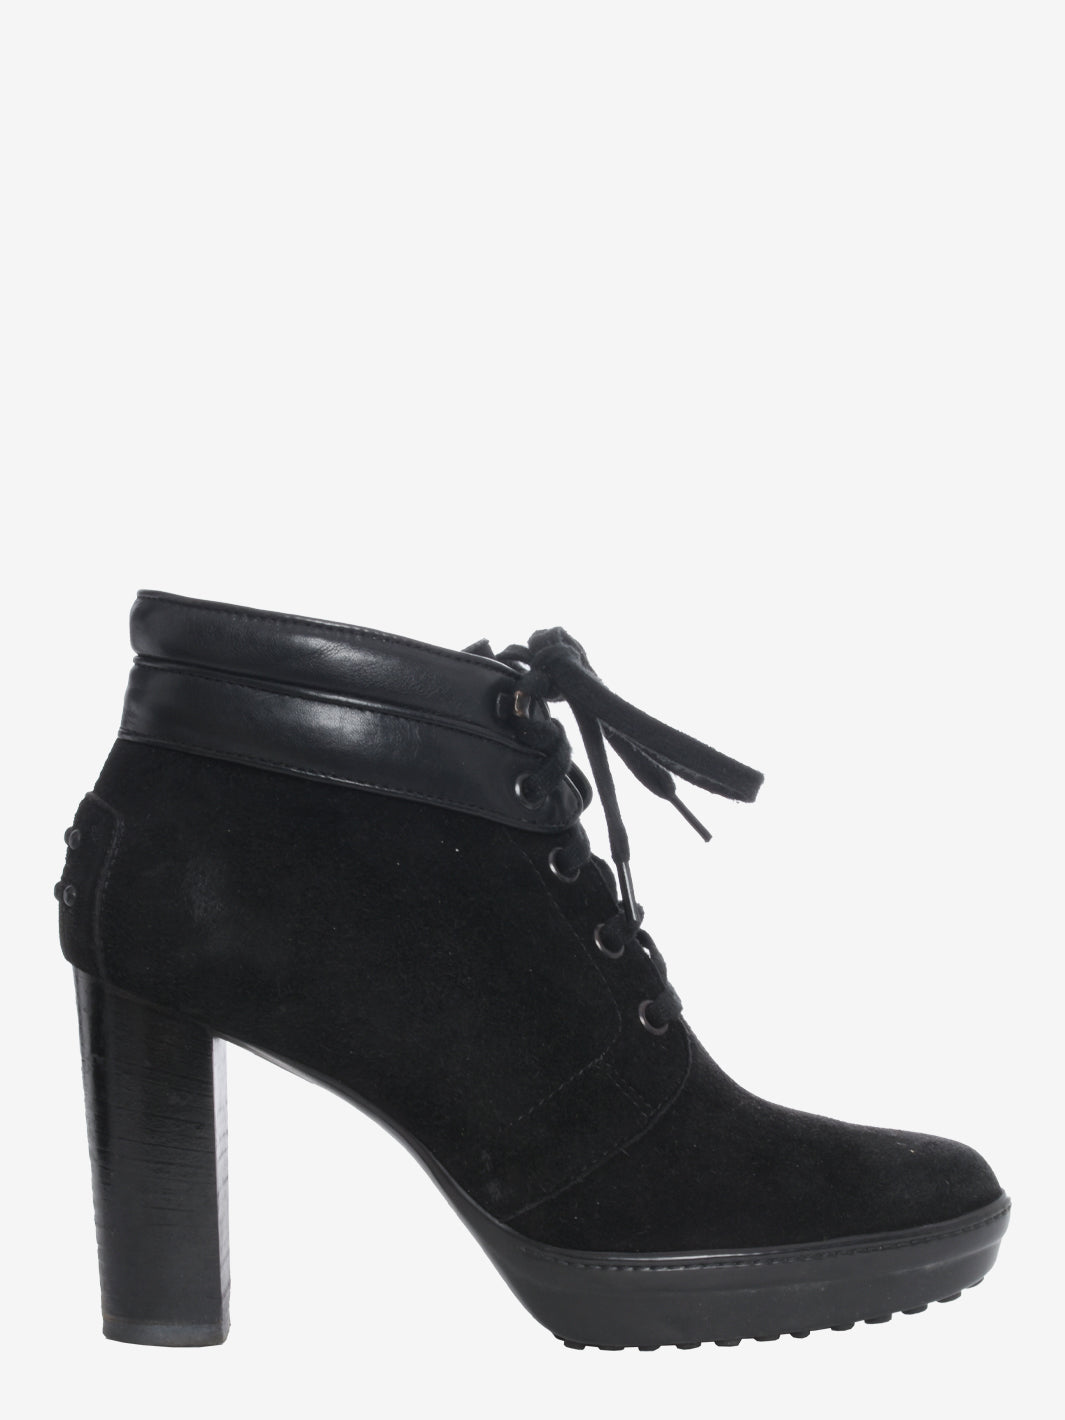 Tods's Black Suade Ankle Boots